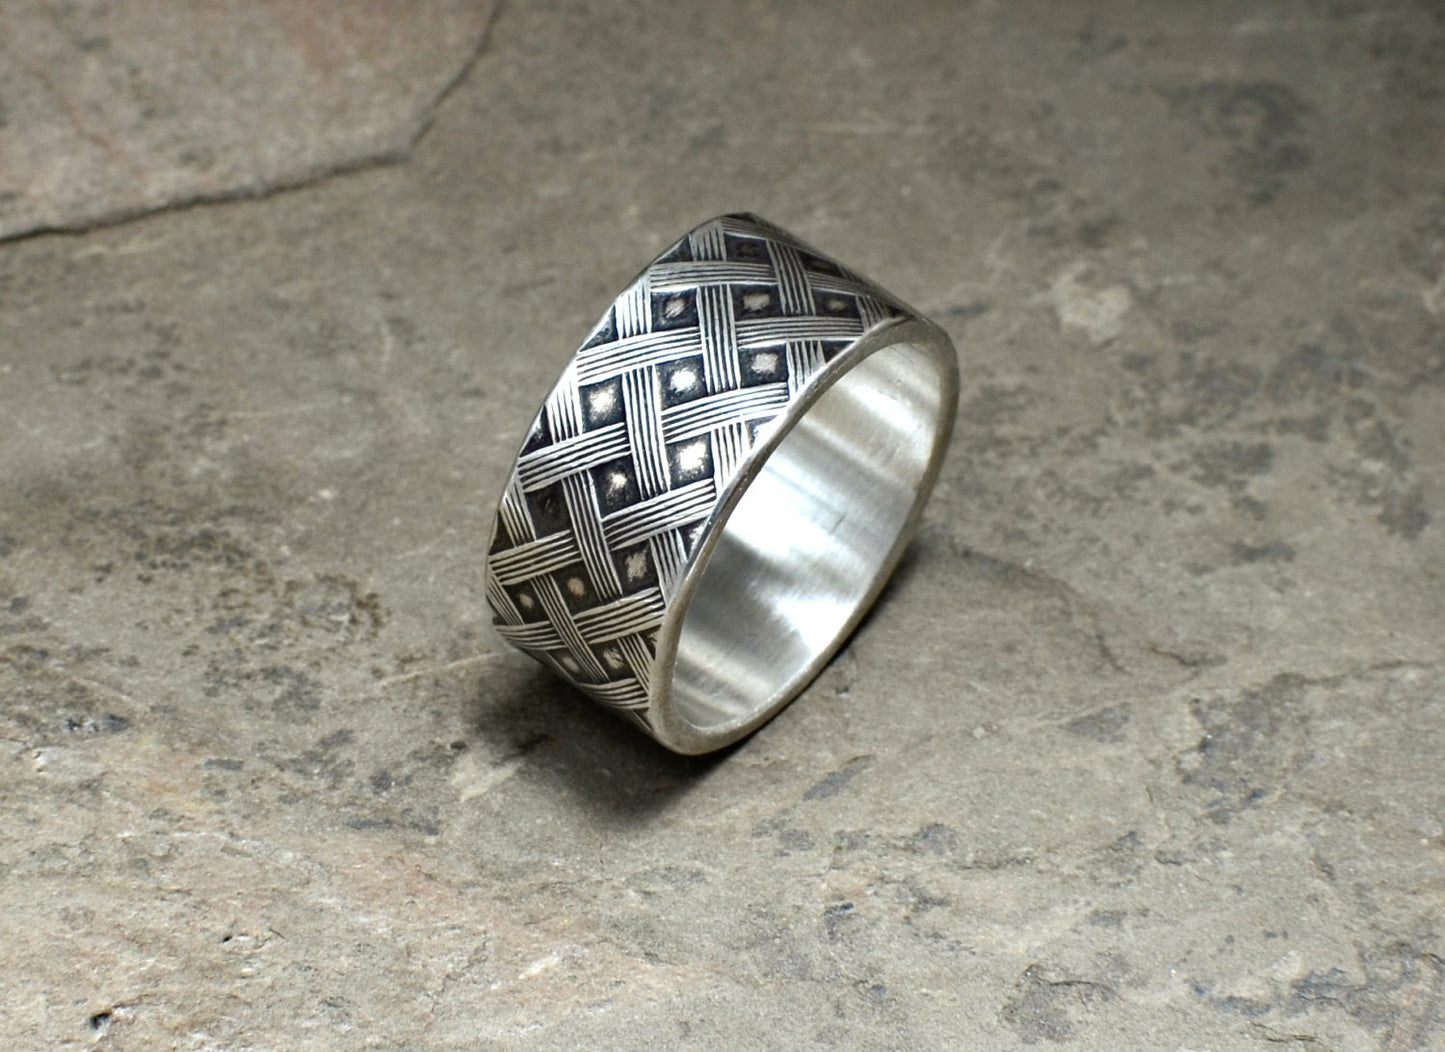 Sterling silver weave ring with dark patina for shadowing and highlighting the design